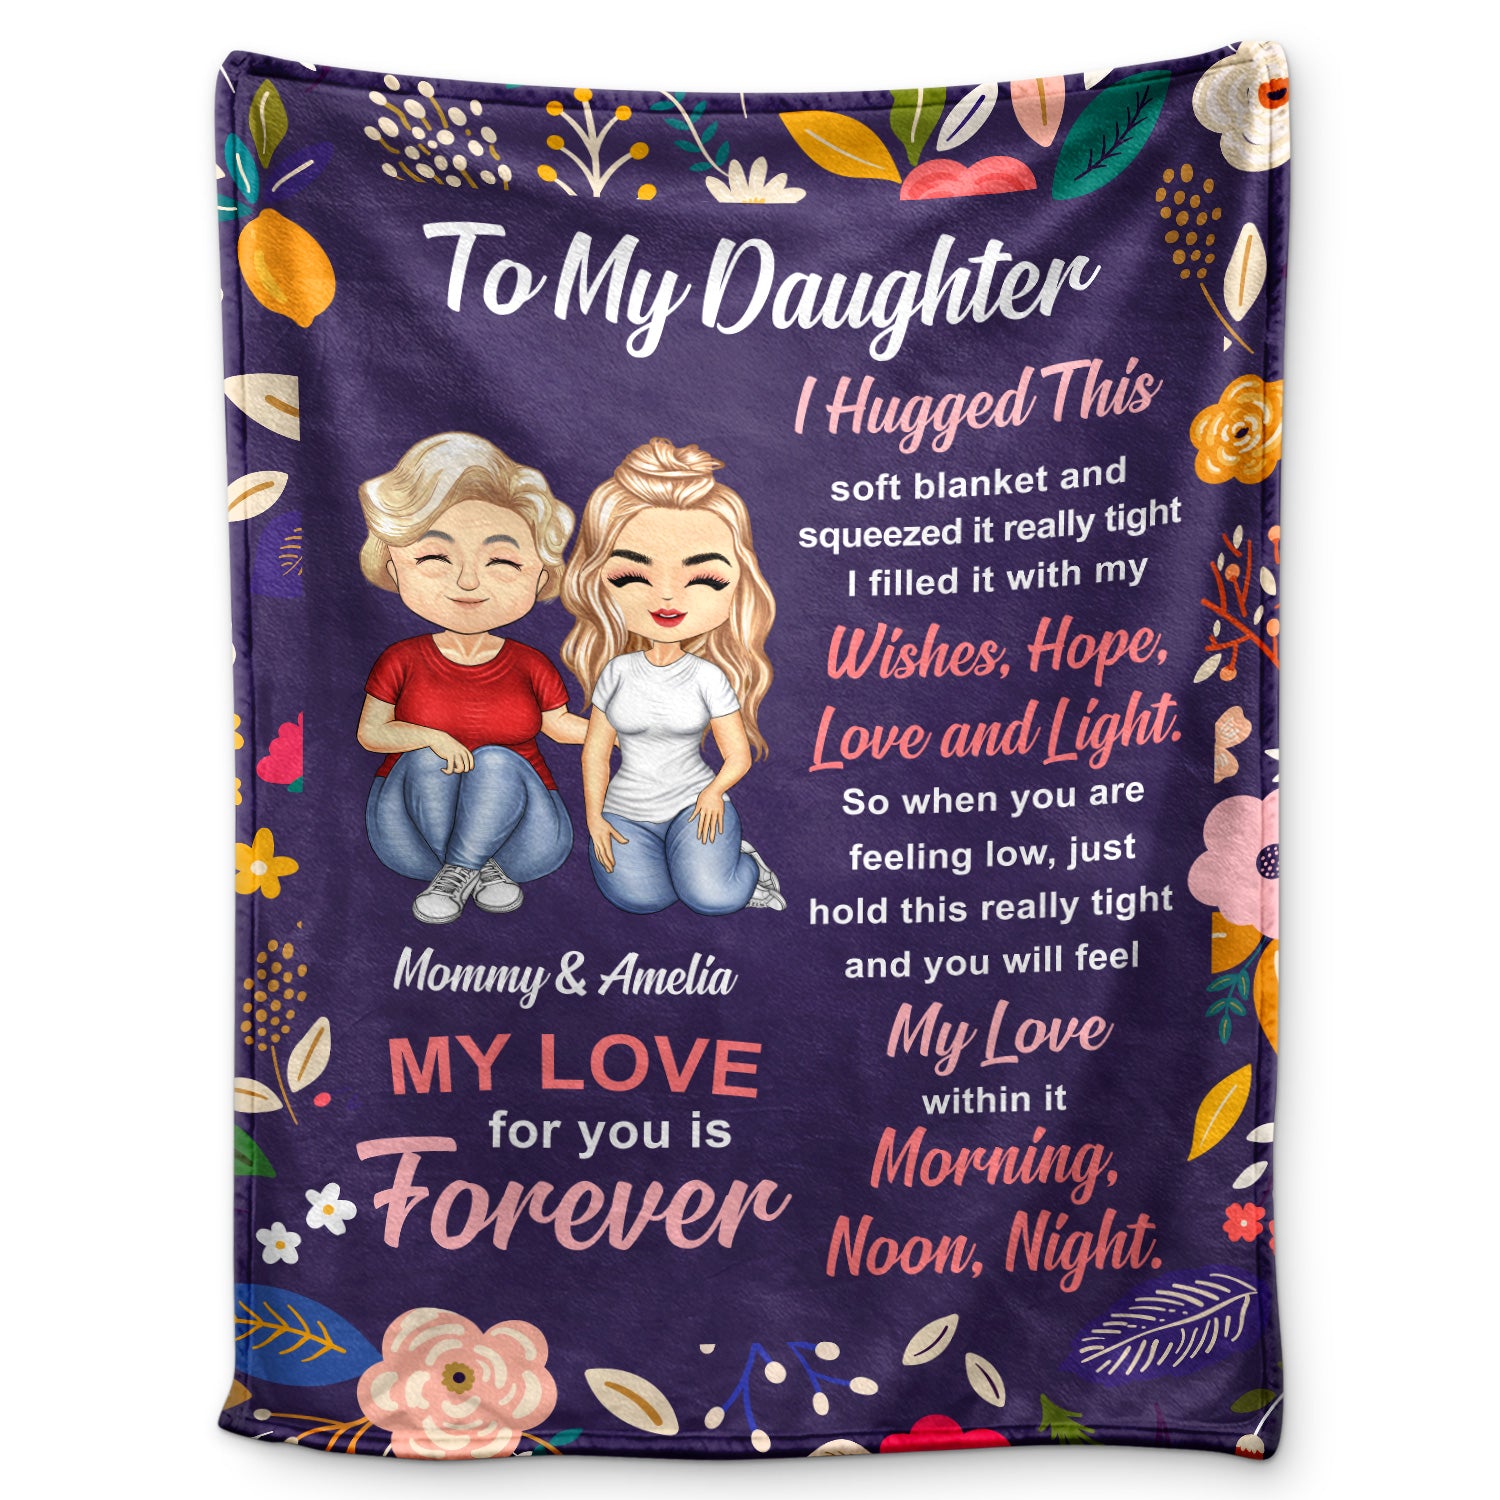 To My Daughter - Gift For Daughter - Personalized Fleece Blanket, Sherpa Blanket